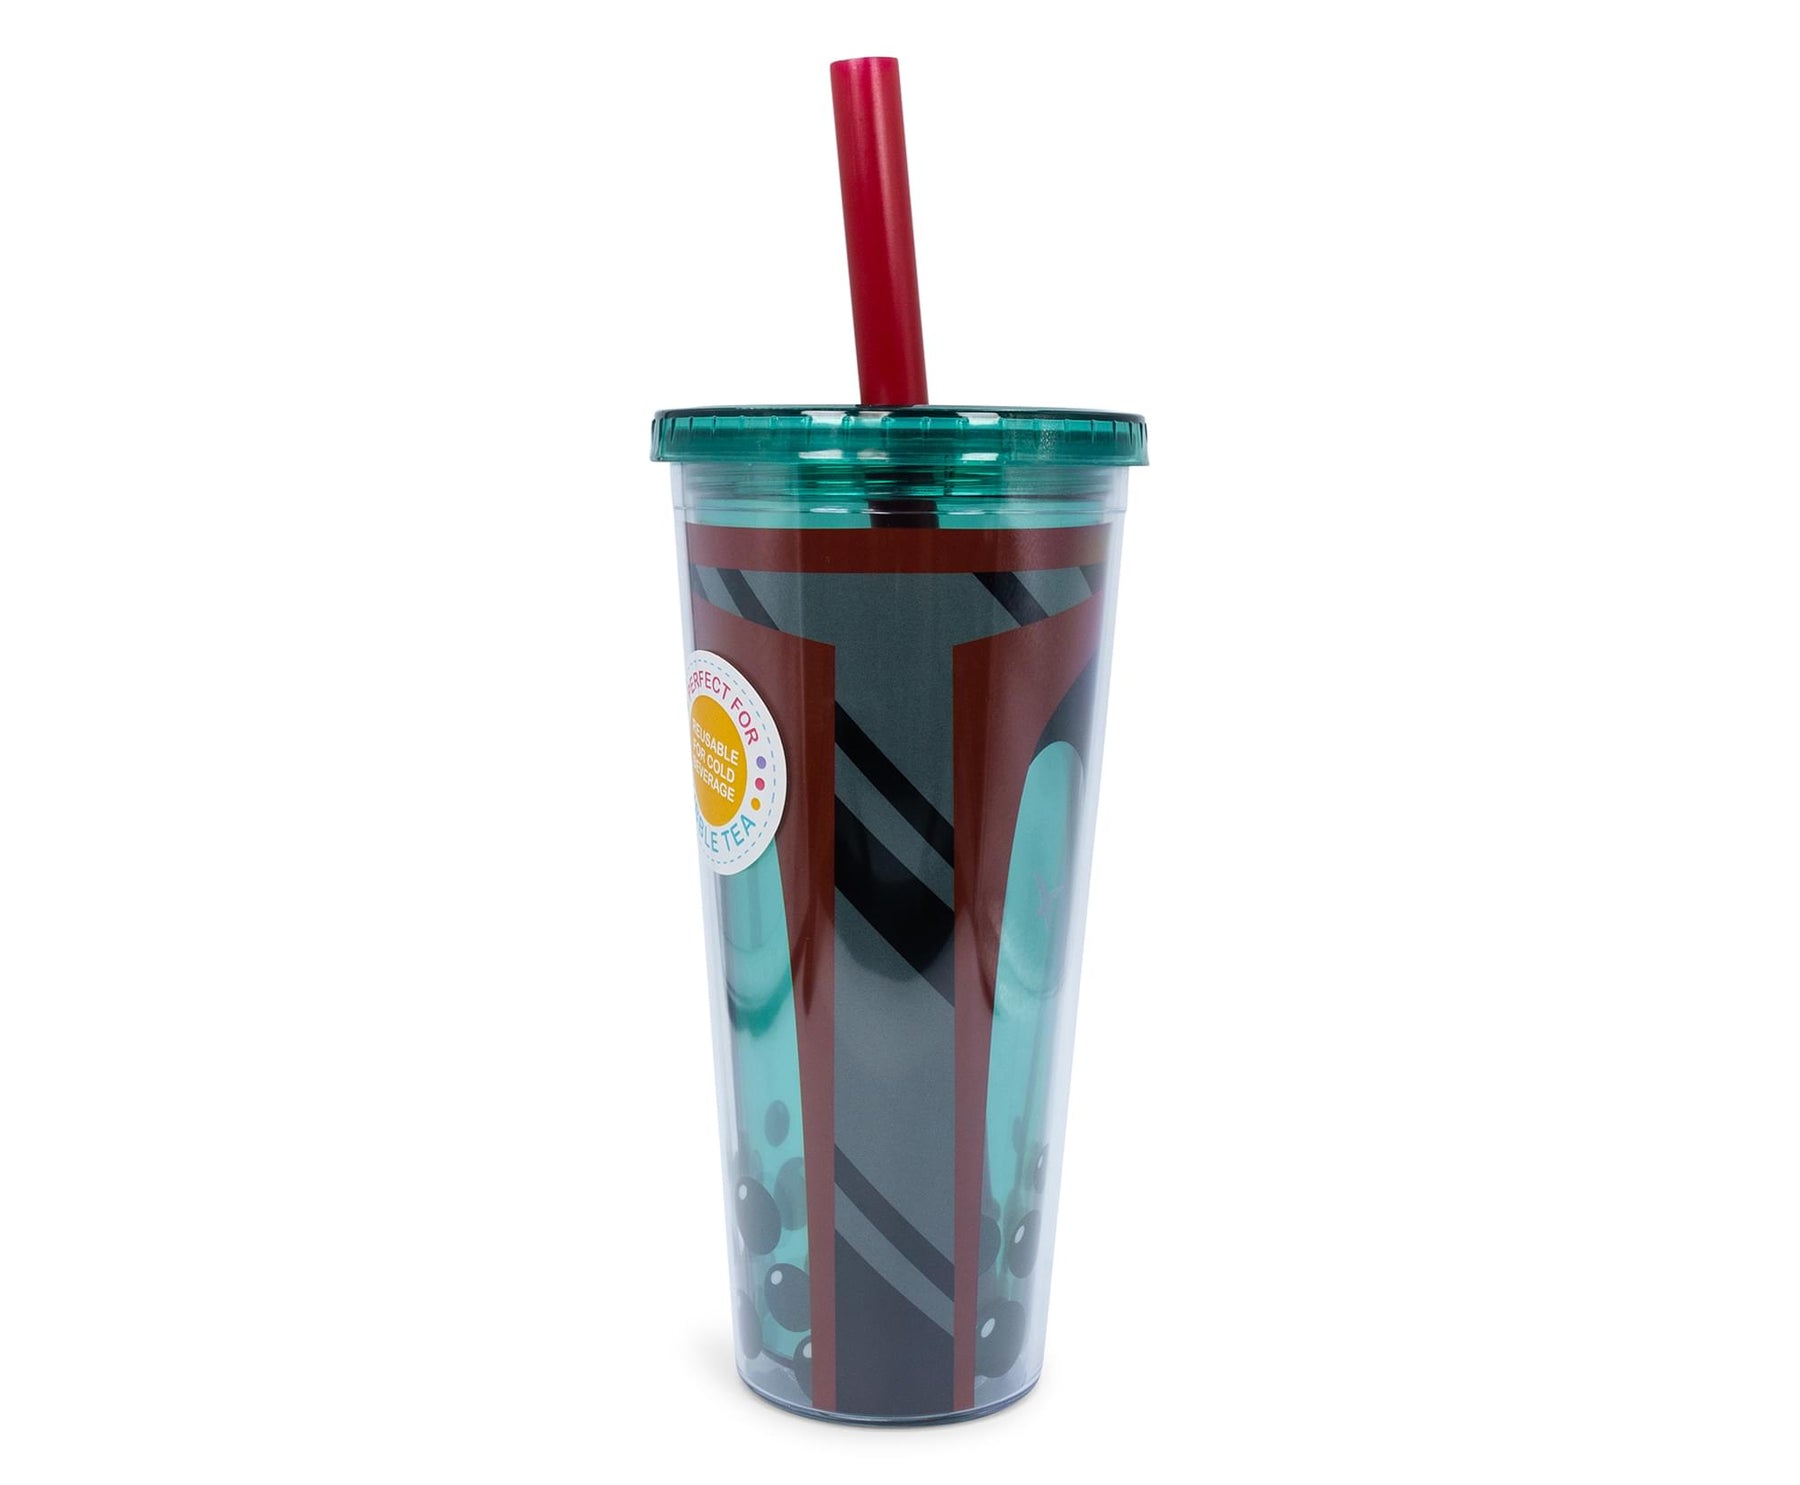 Star Wars Boba Fett Plastic Carnival Cup with Lid and Straw | 24 Ounces